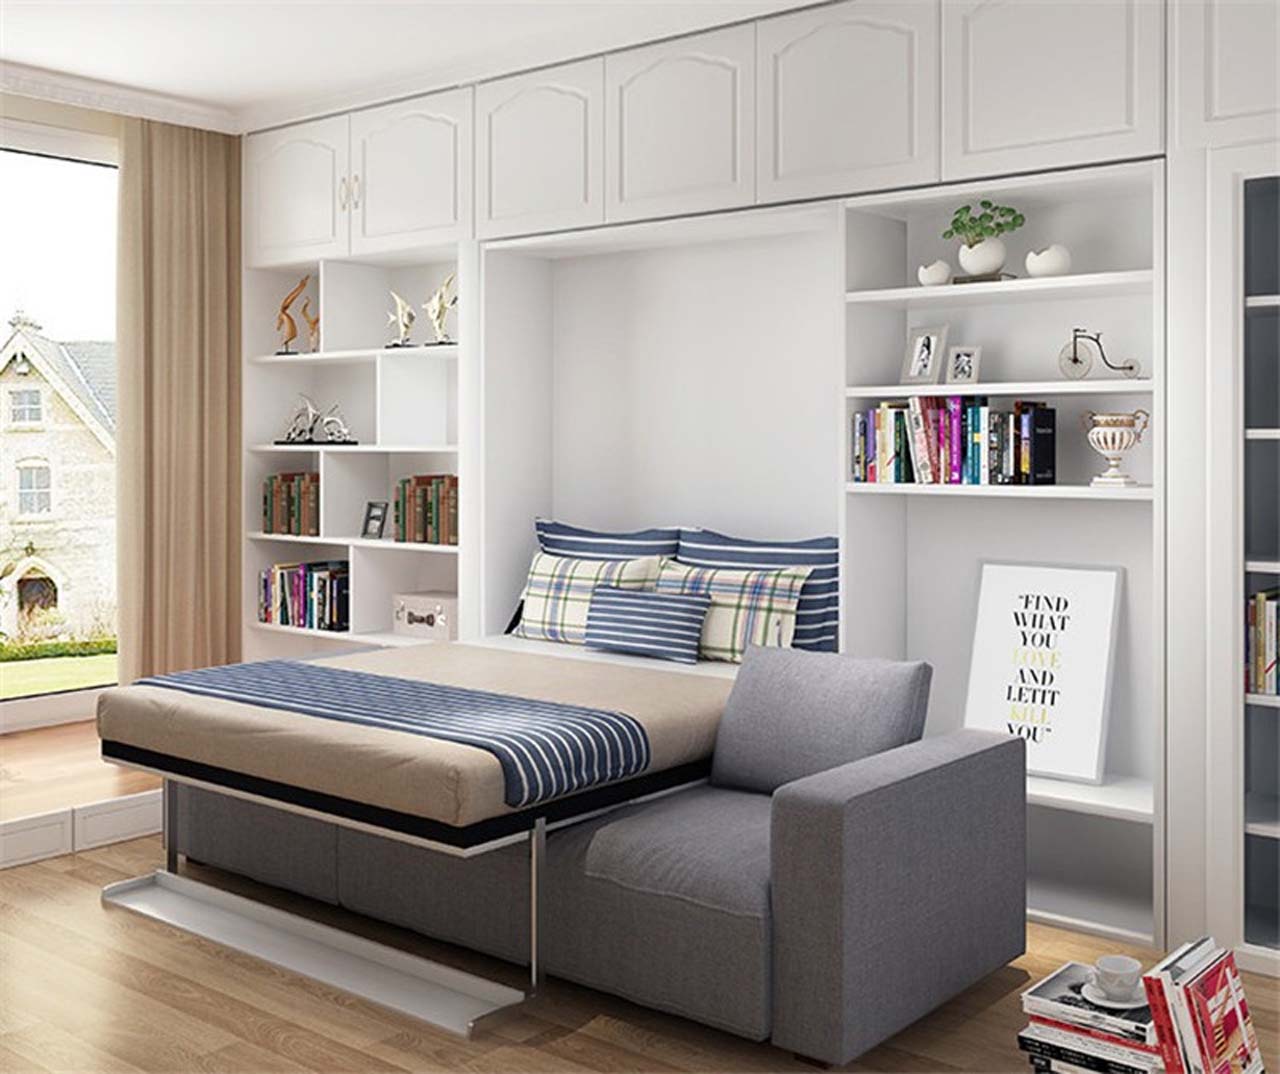 Why Choose A Murphy Bed